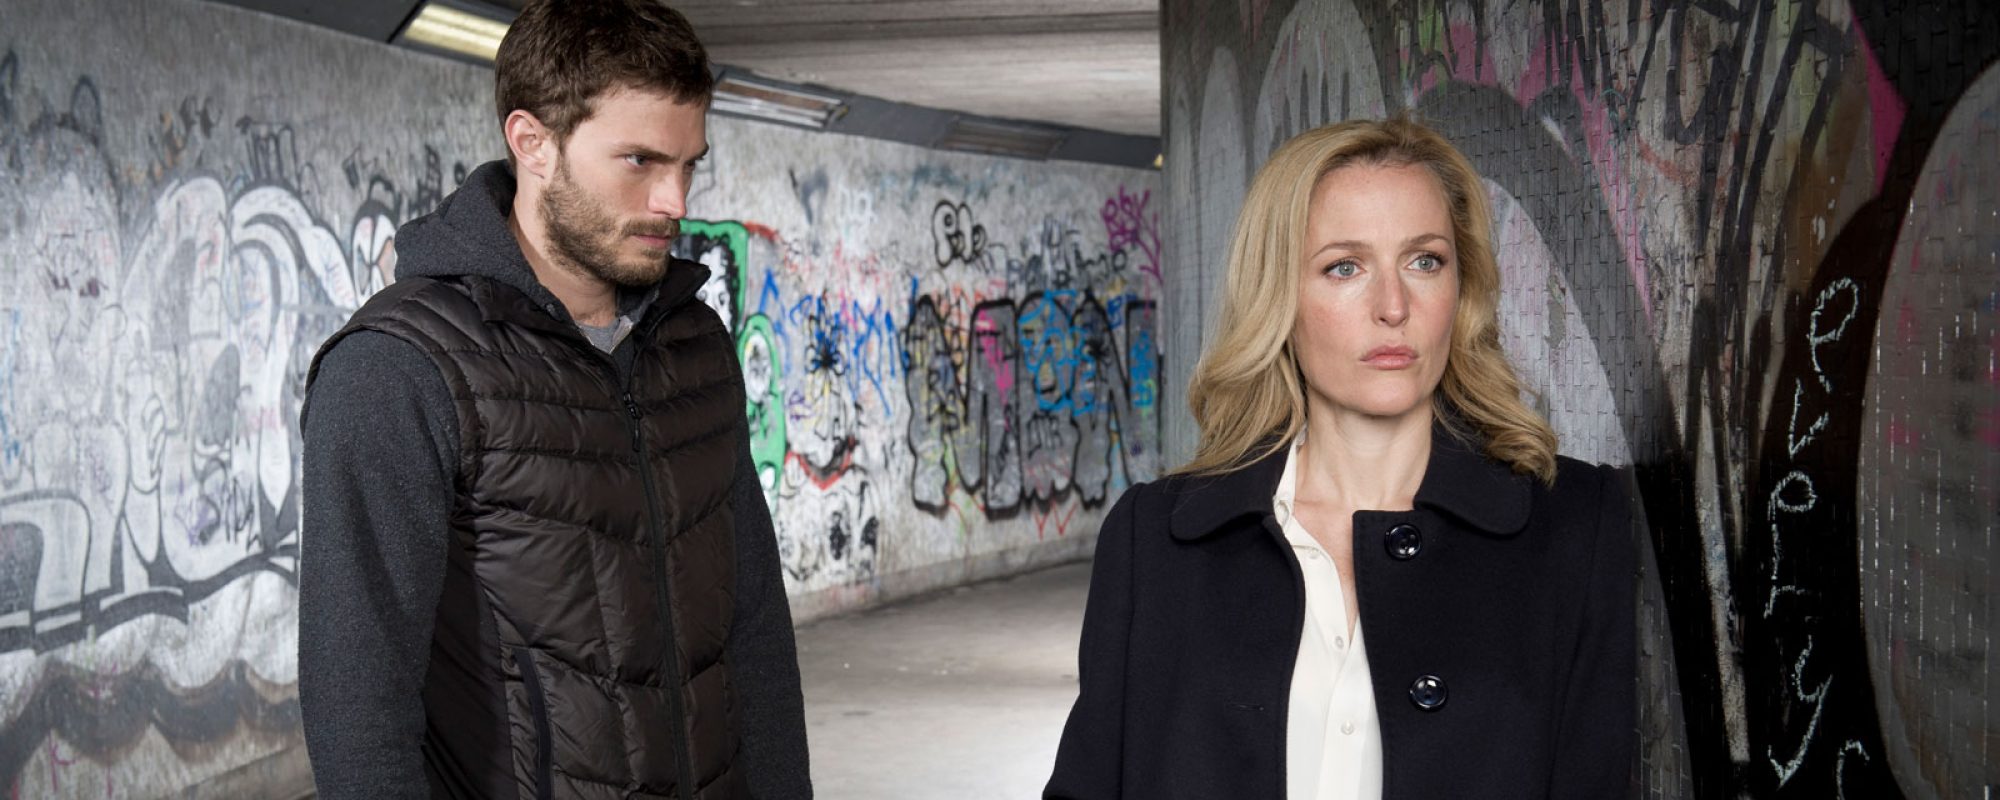 GILLIAN ANDERSON AND JAMIE DORNAN COME TO OVATION TV WITH THE FALL STARTING SATURDAY, OCTOBER 10